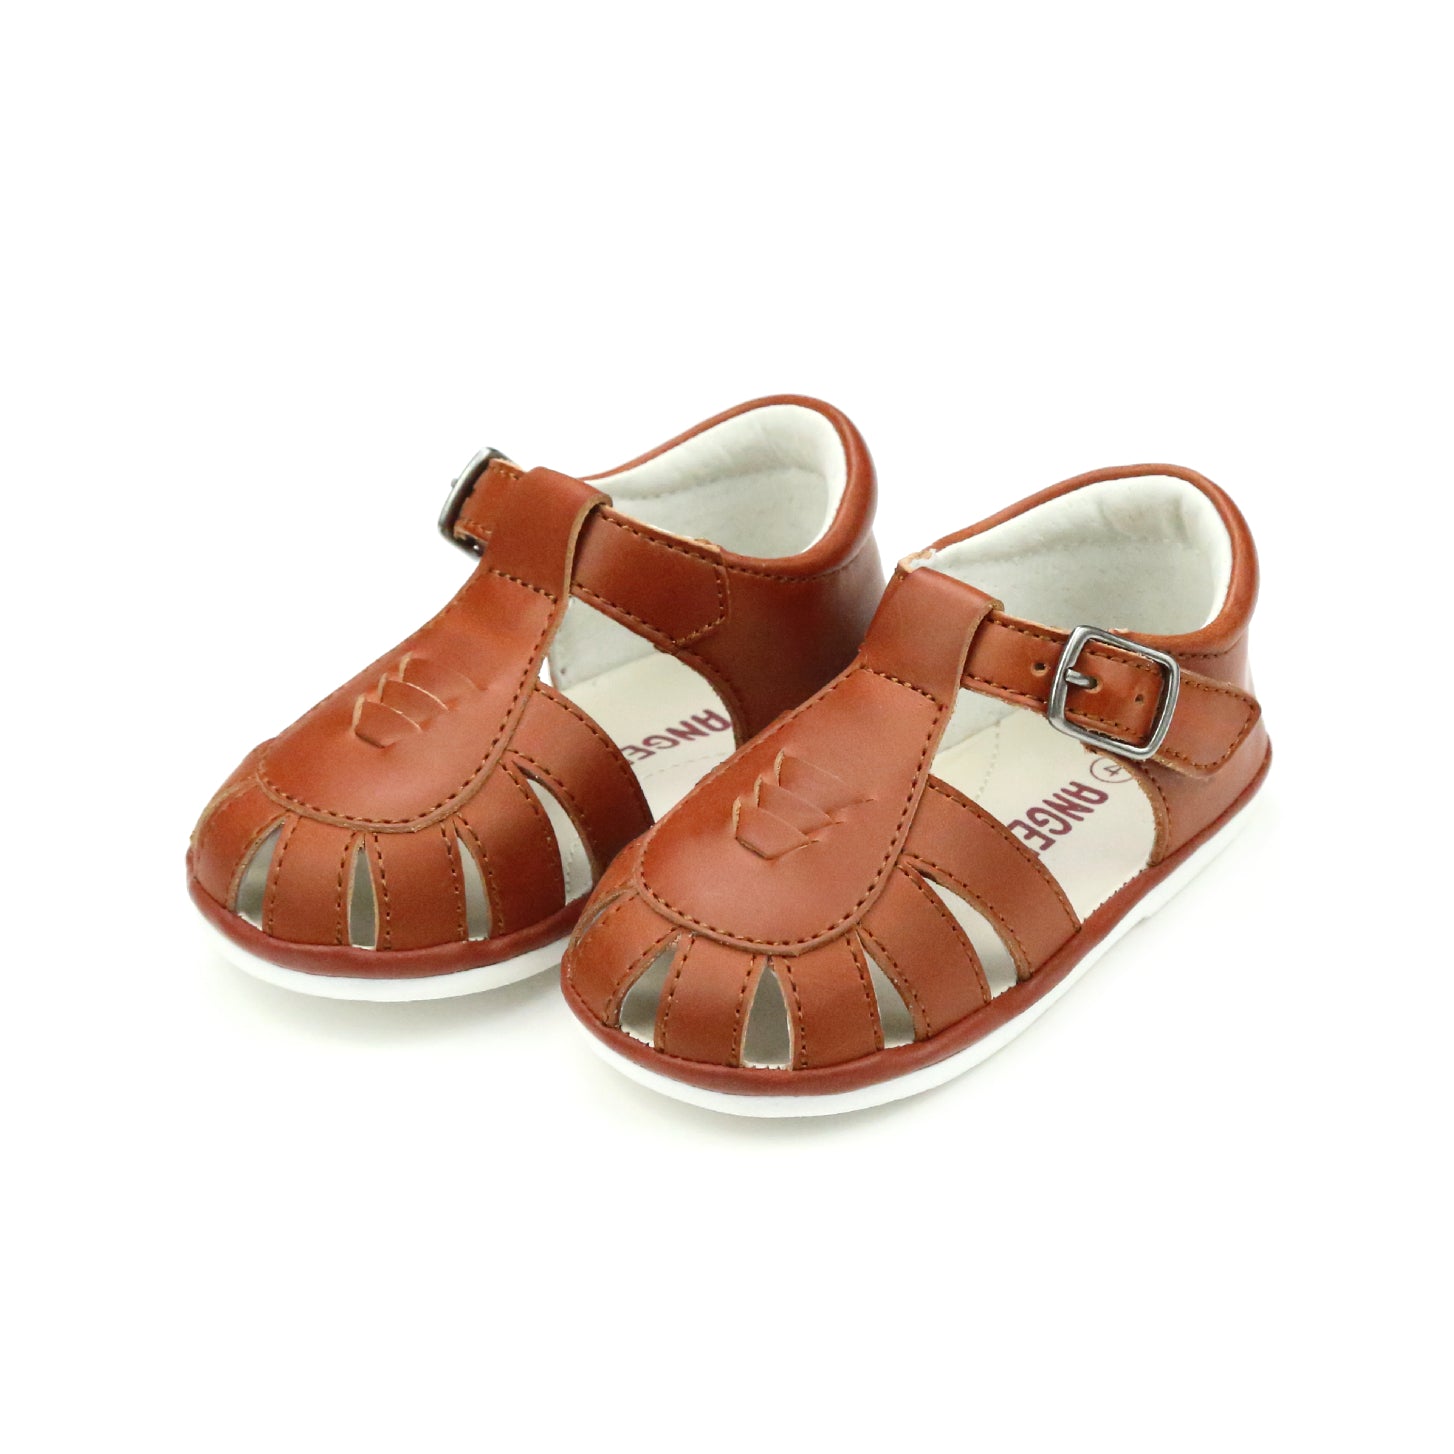 rylee cognac leather baby sandals from Short Cakes – Short Cakes